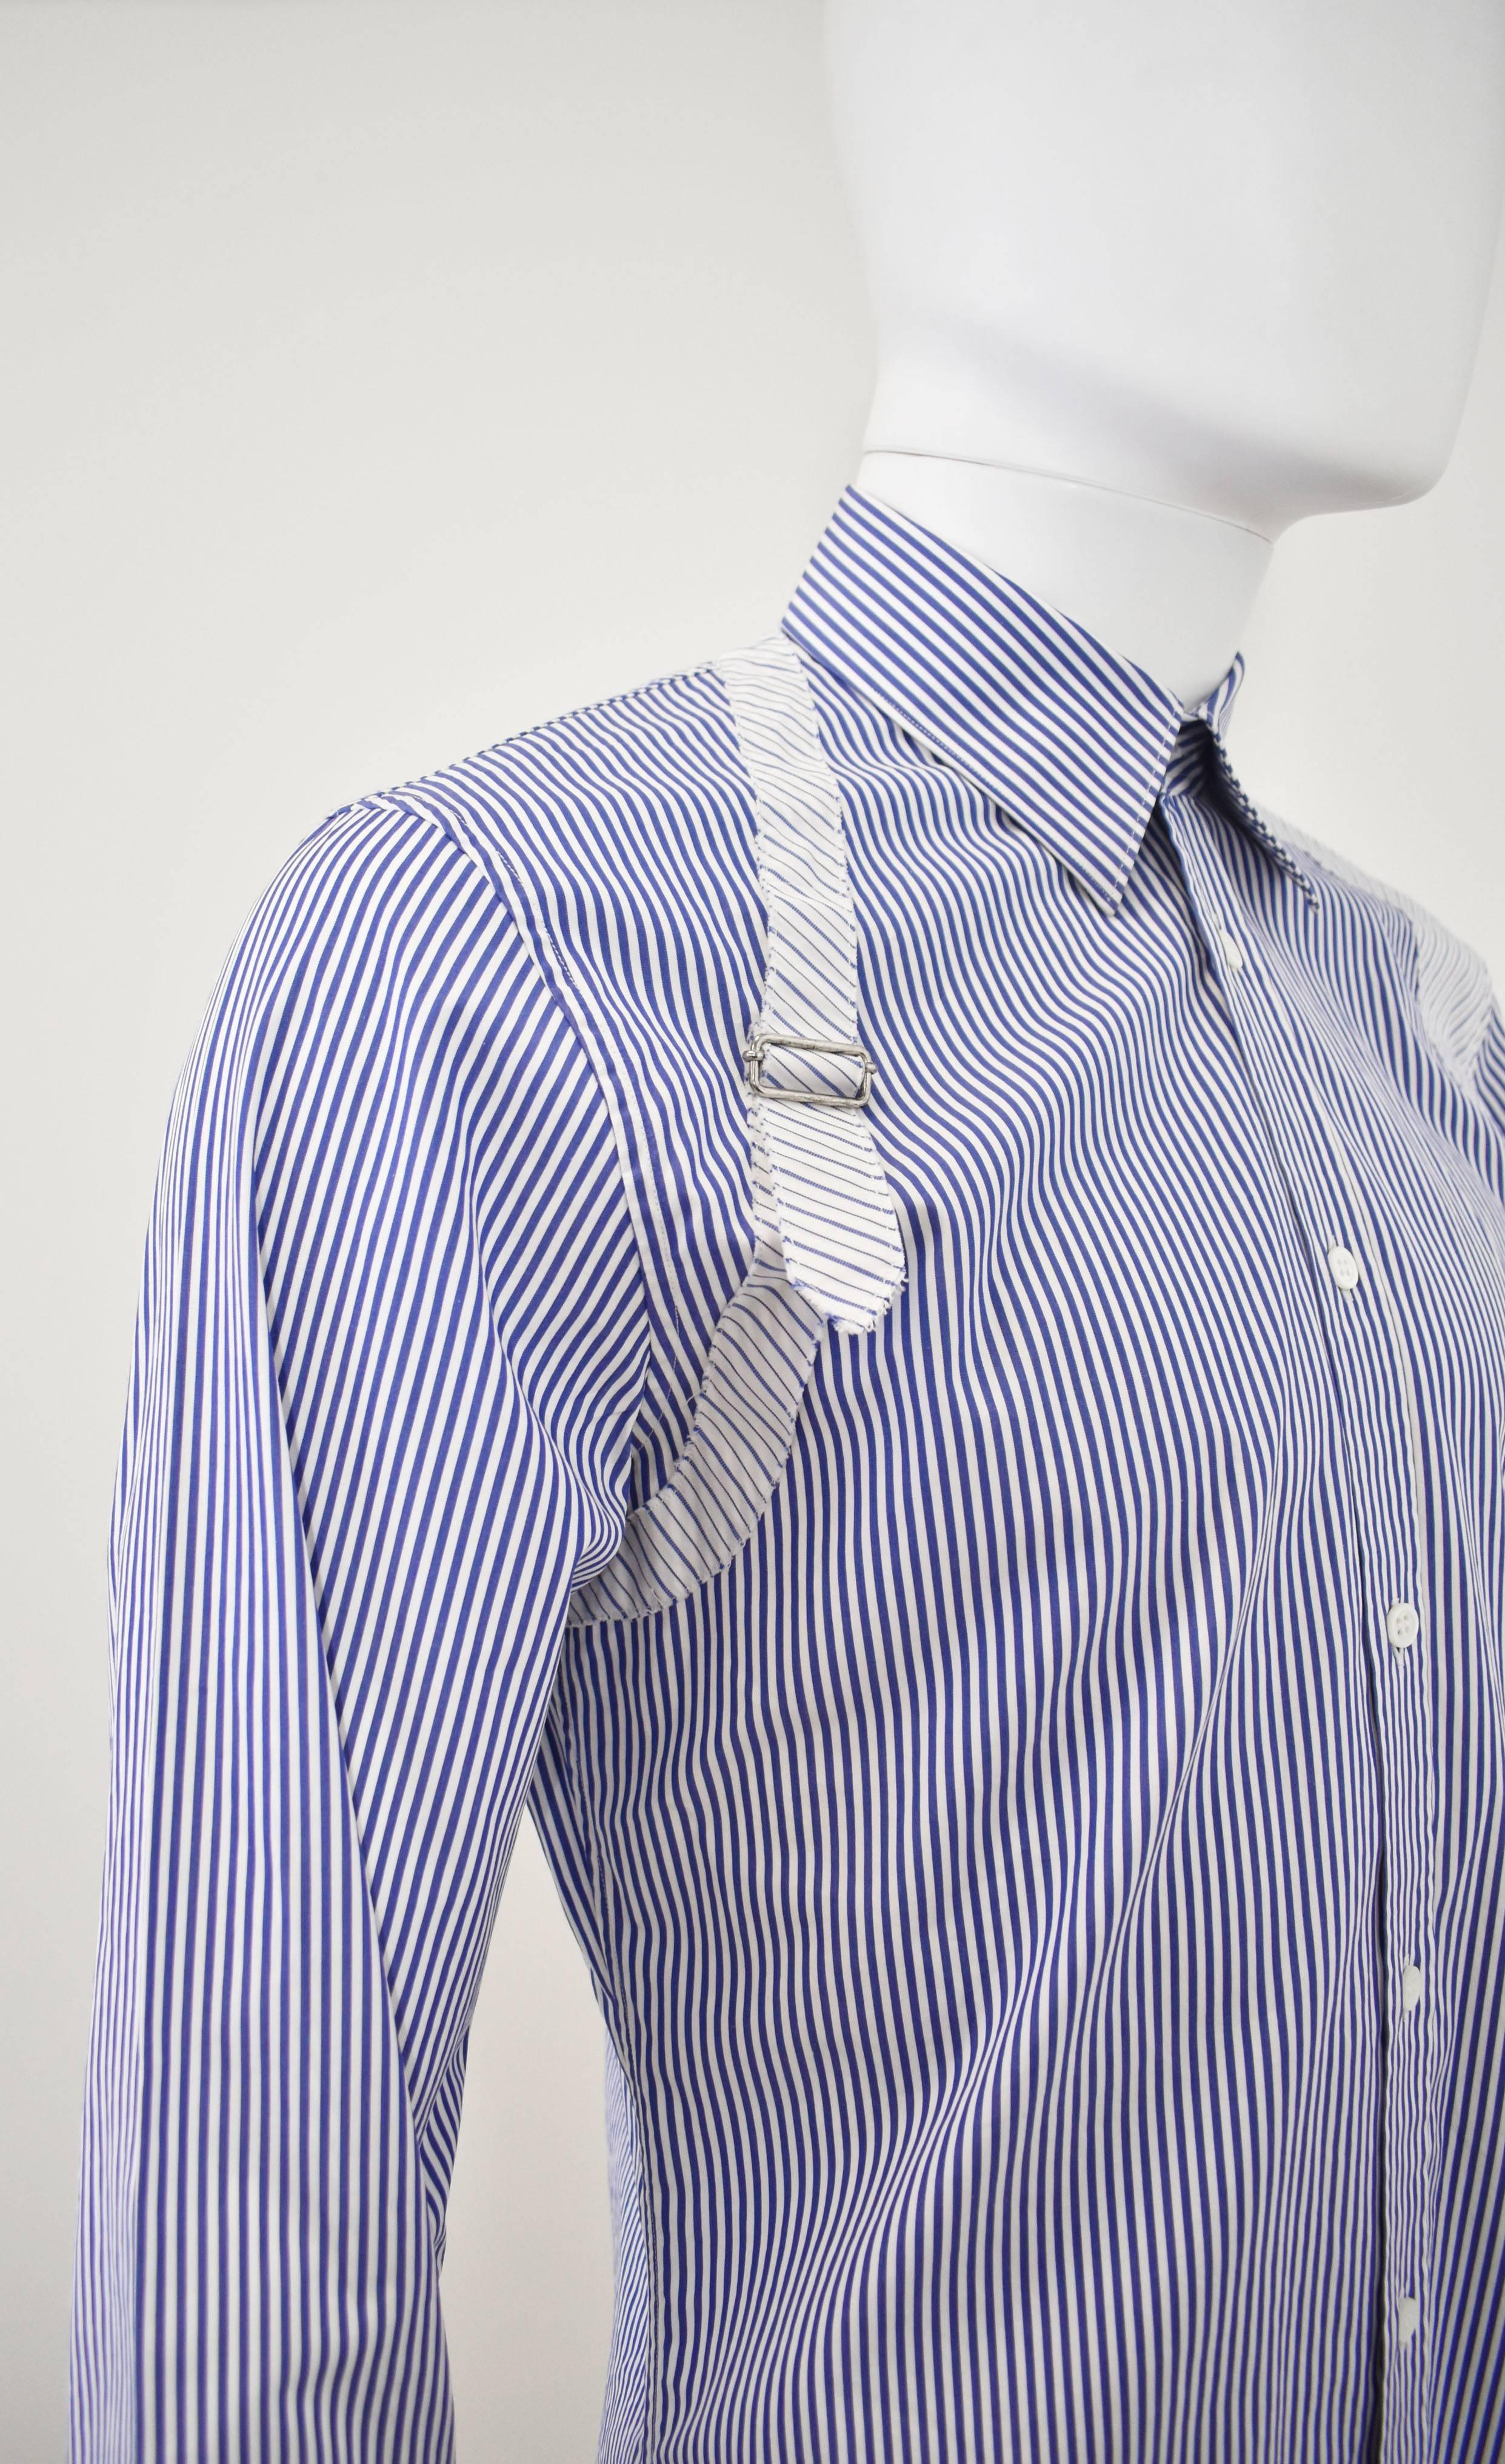 Alexander McQueen White & Blue Stripe Shirt with Harness Press Sample A/W 2015 1